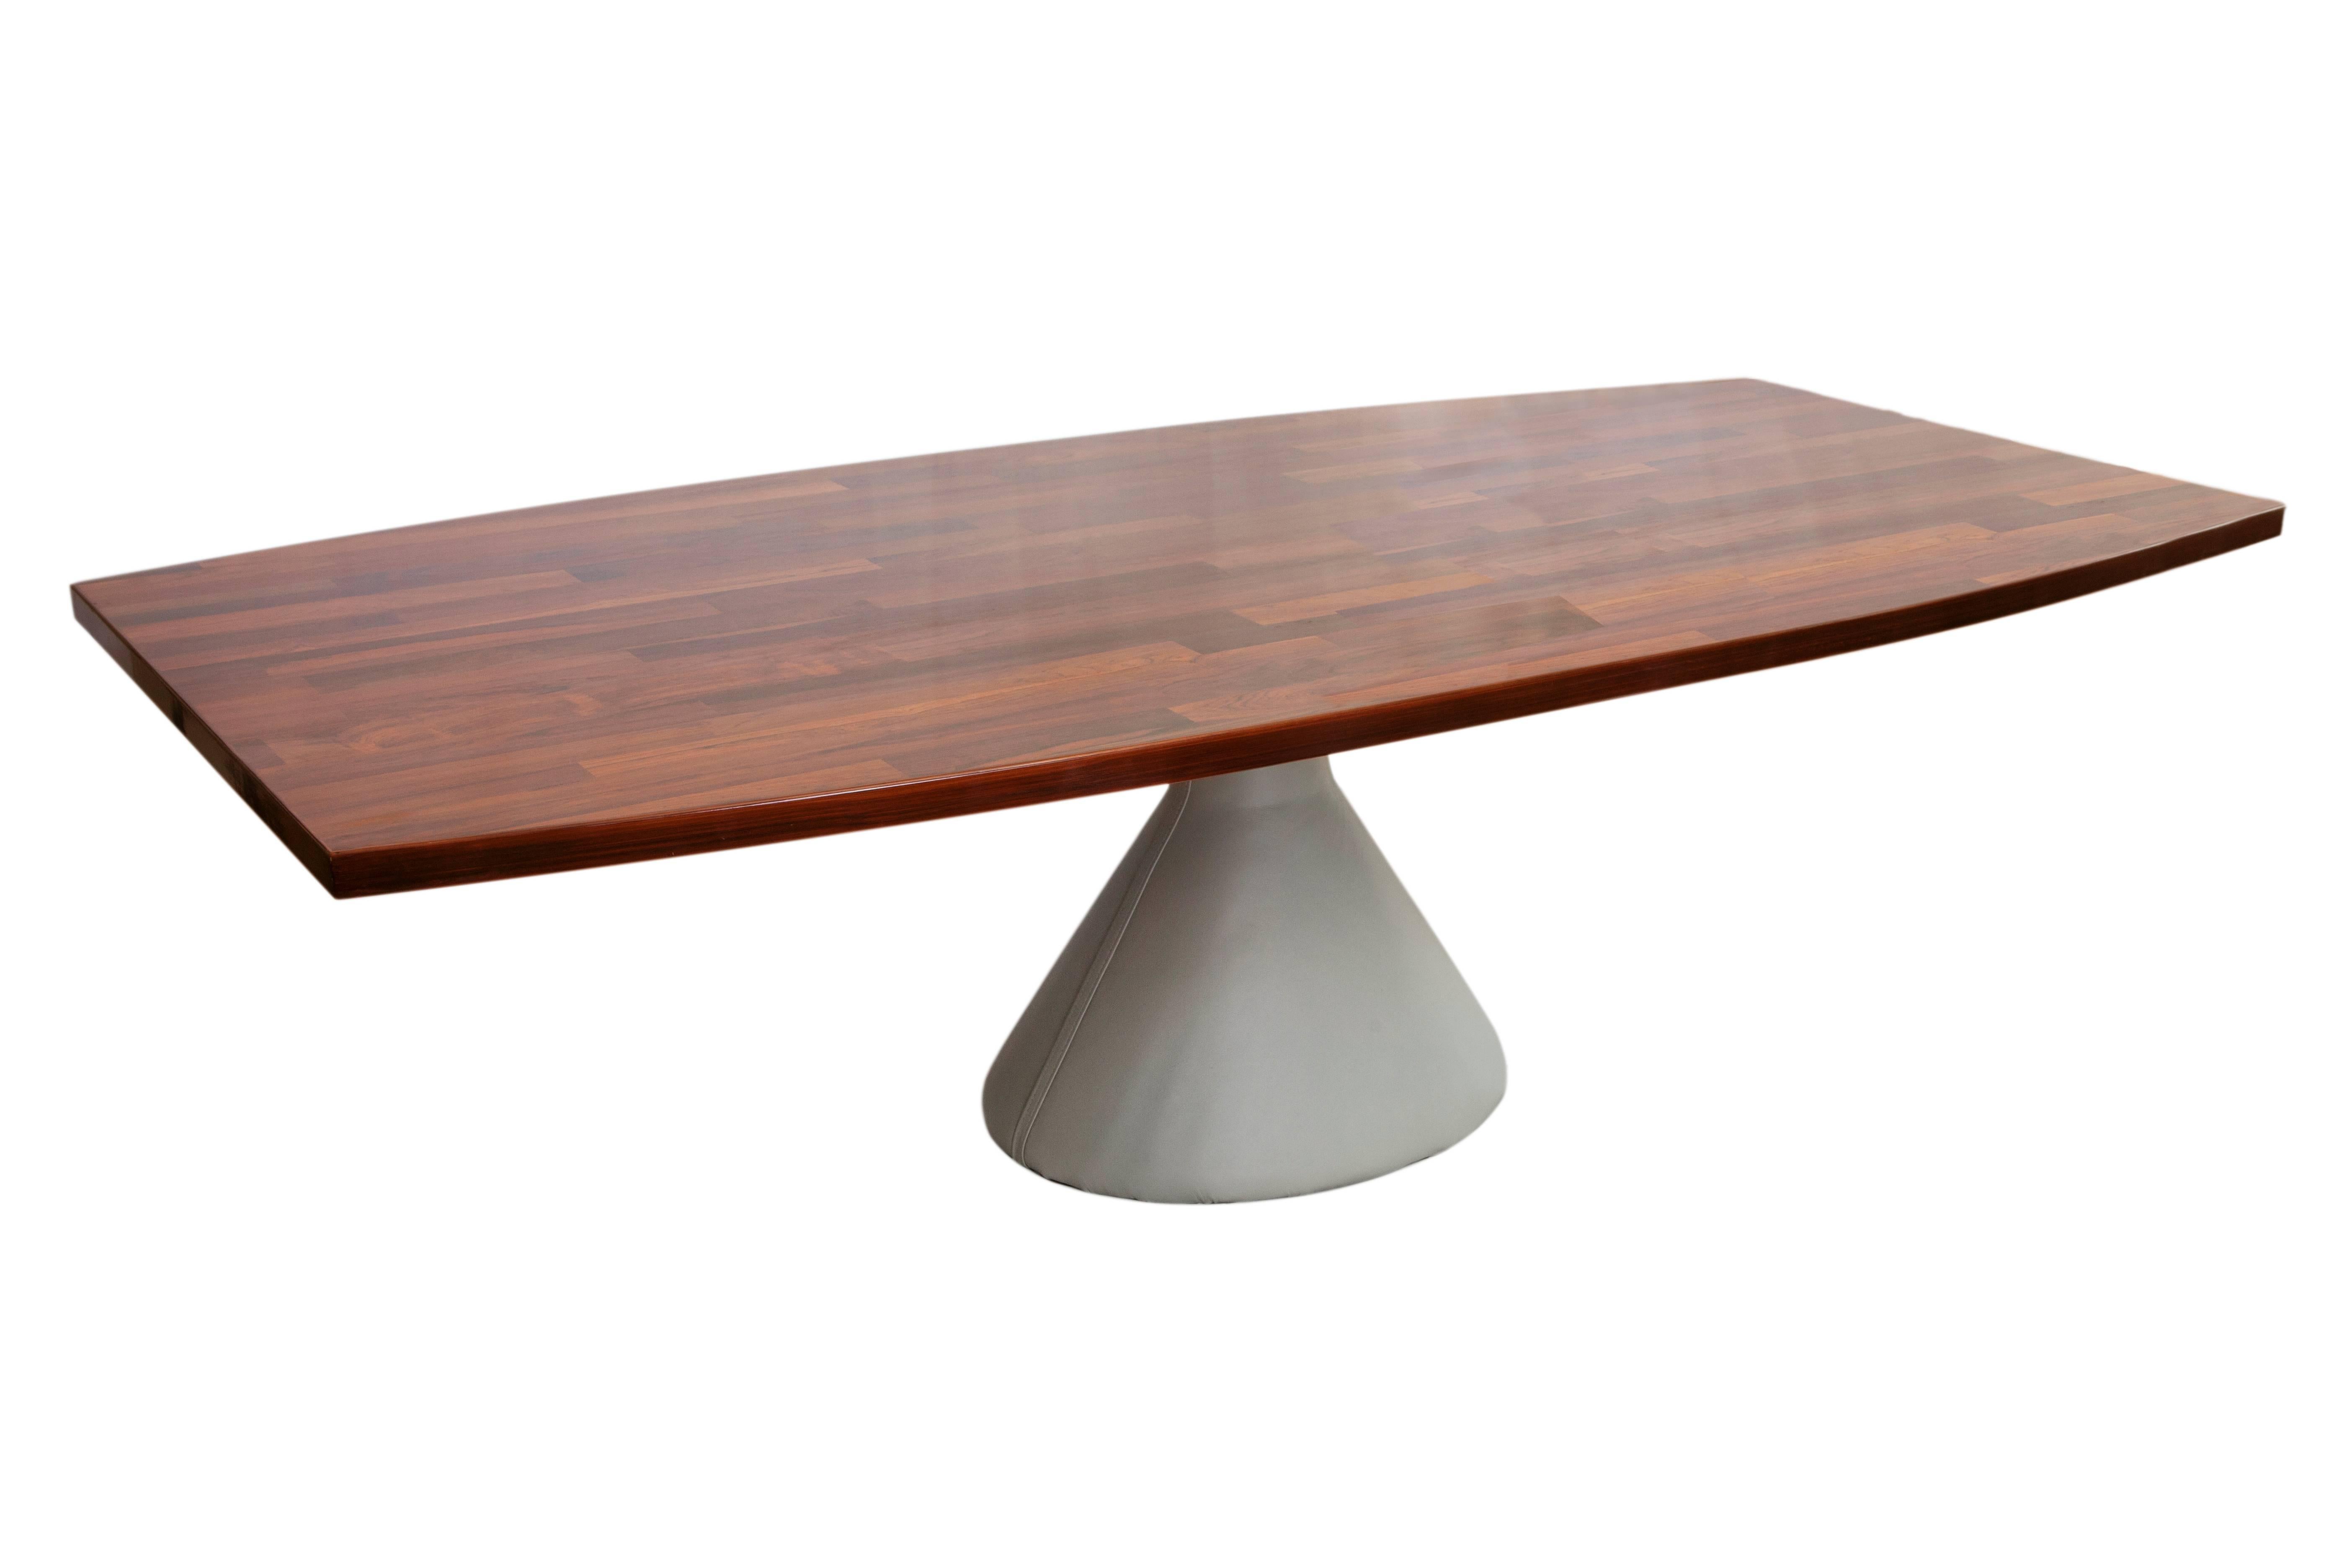 The 'Guaruja' dining table by architect and designer Jorge Zalszupin, including a  rounded top in Brazilian jacarandá and raised on conical pedestal base with gray leather cover. Excellent condition and leather base recently reupholstered.